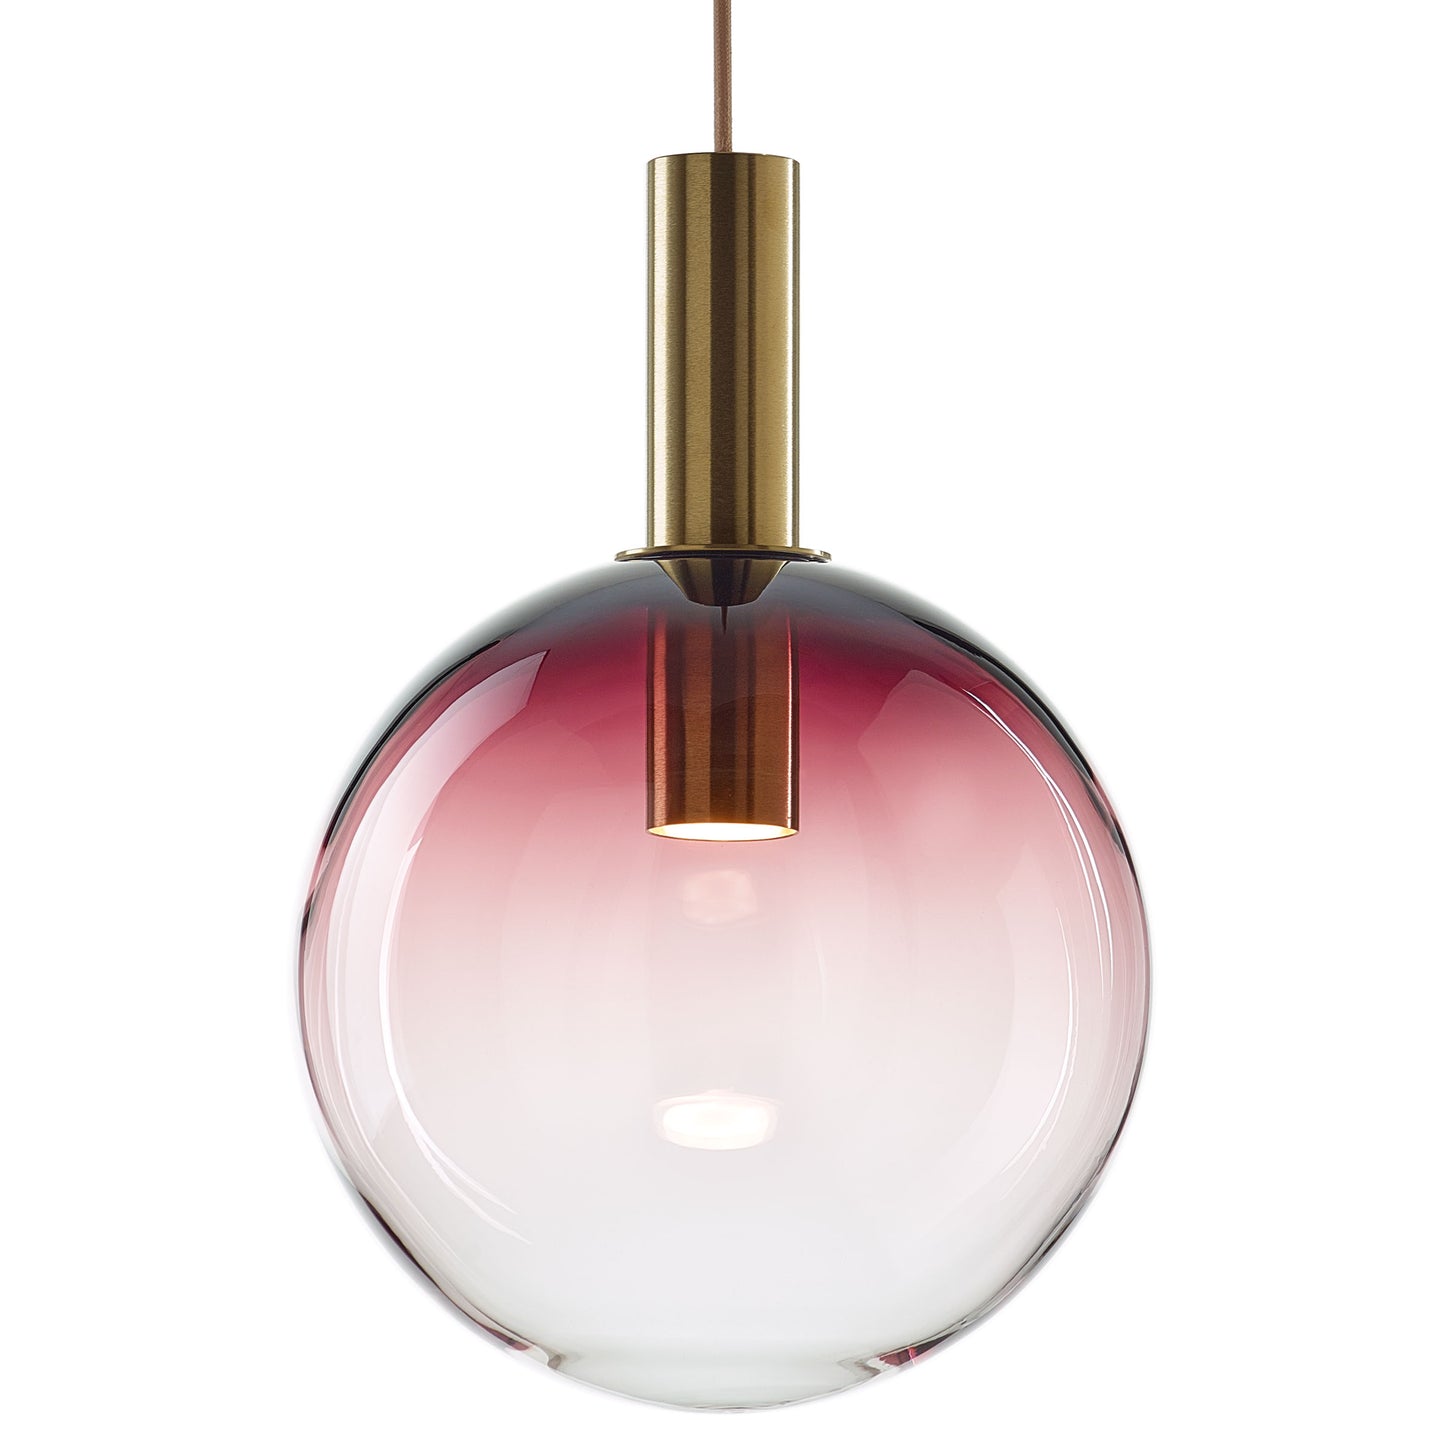 BOMMA - DIVINA PENDANT - from $3,880.00